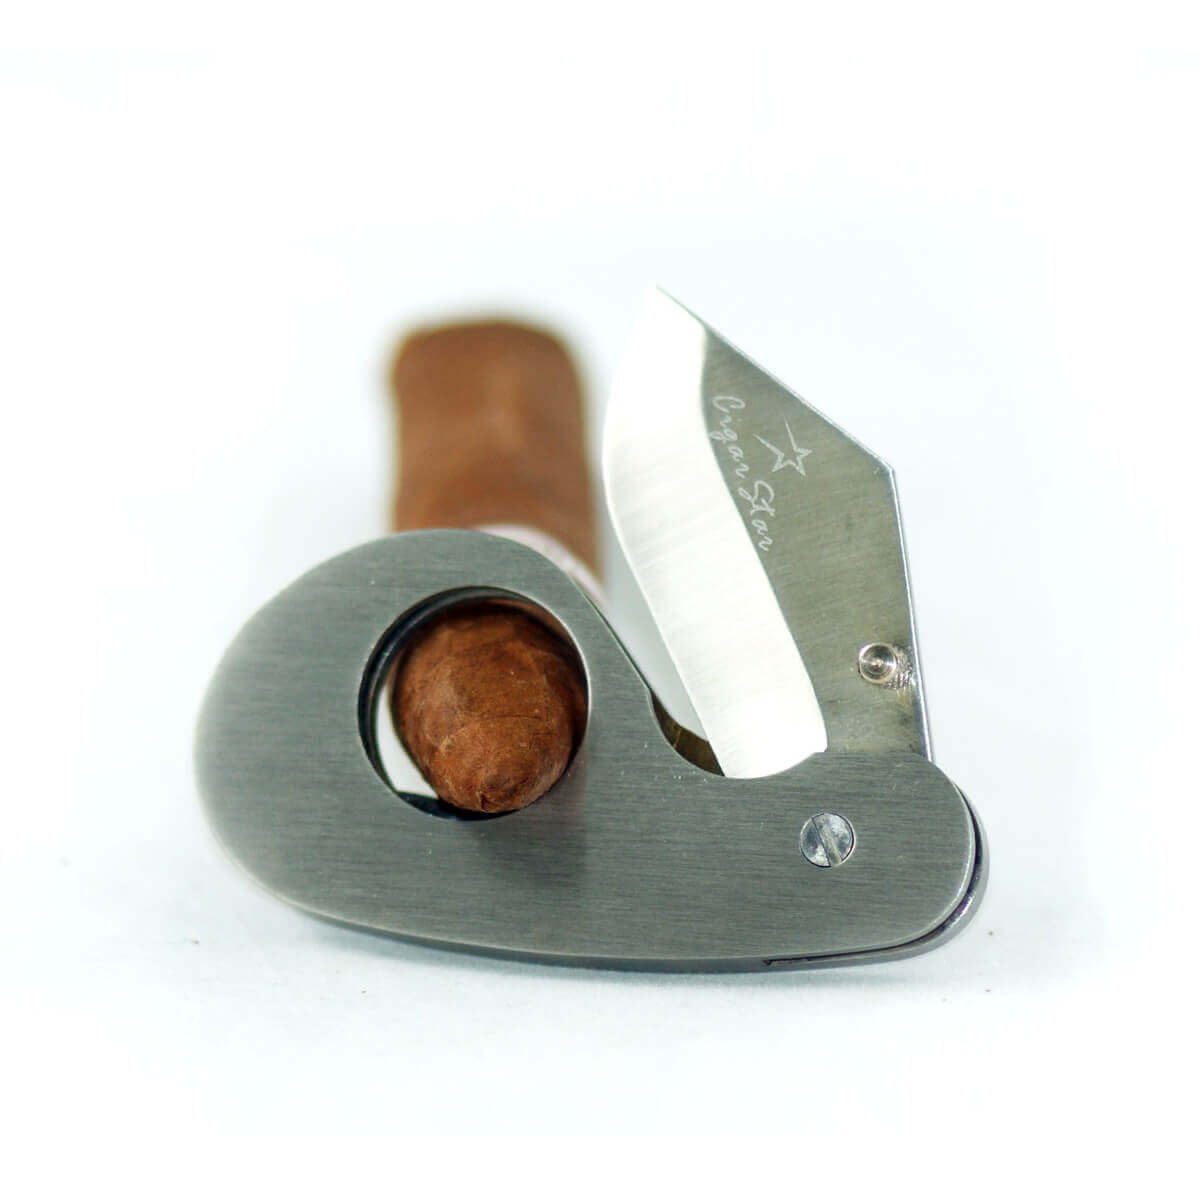 Why is your cigar cutter so important?